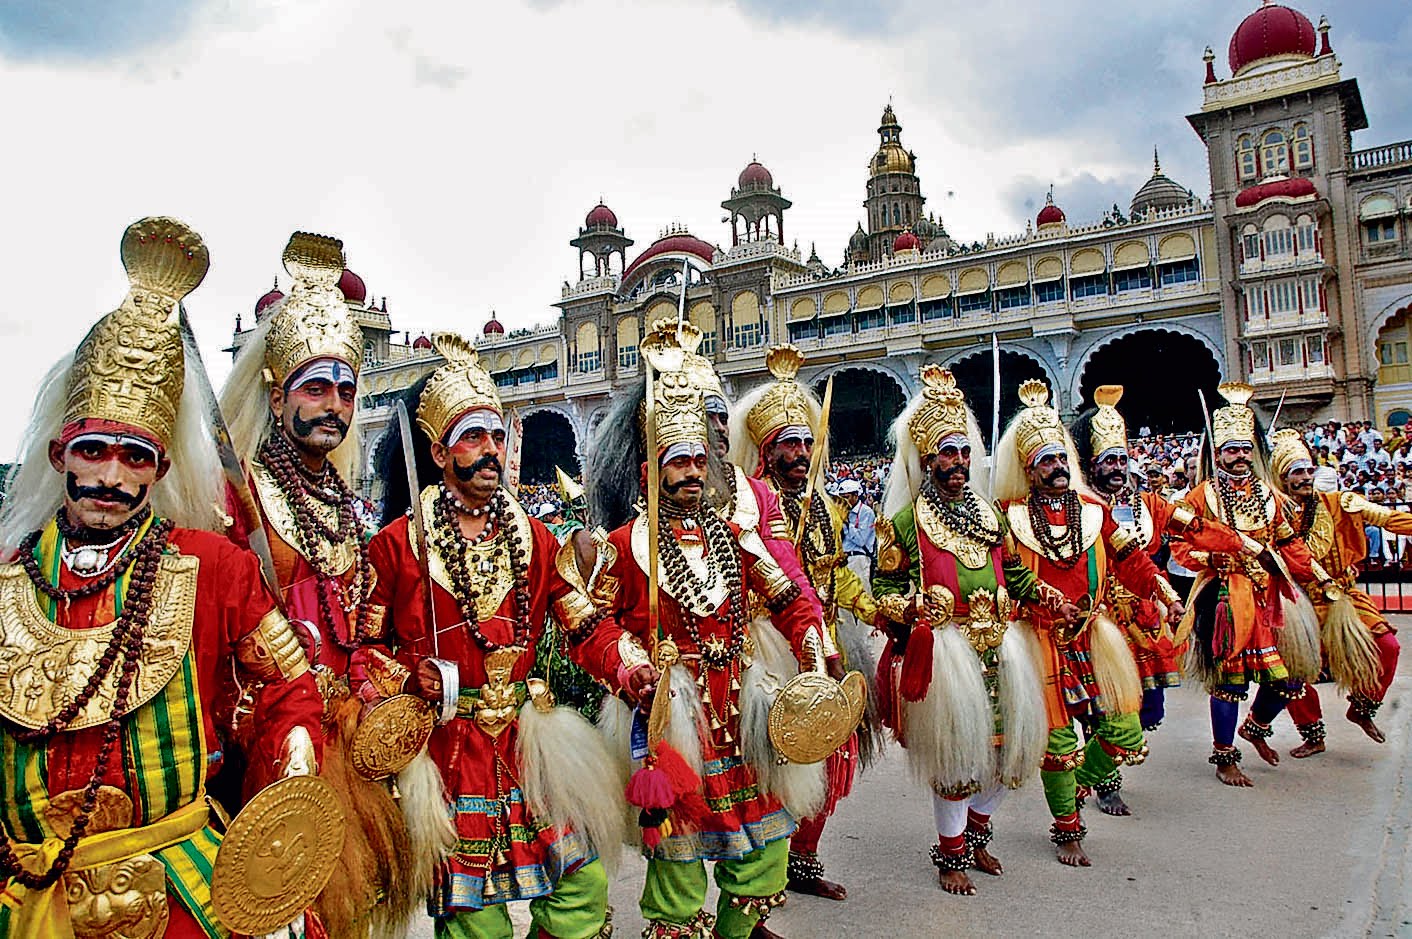 The Best Places To Experience The Top Indian Festivals - Via.com Travel ...